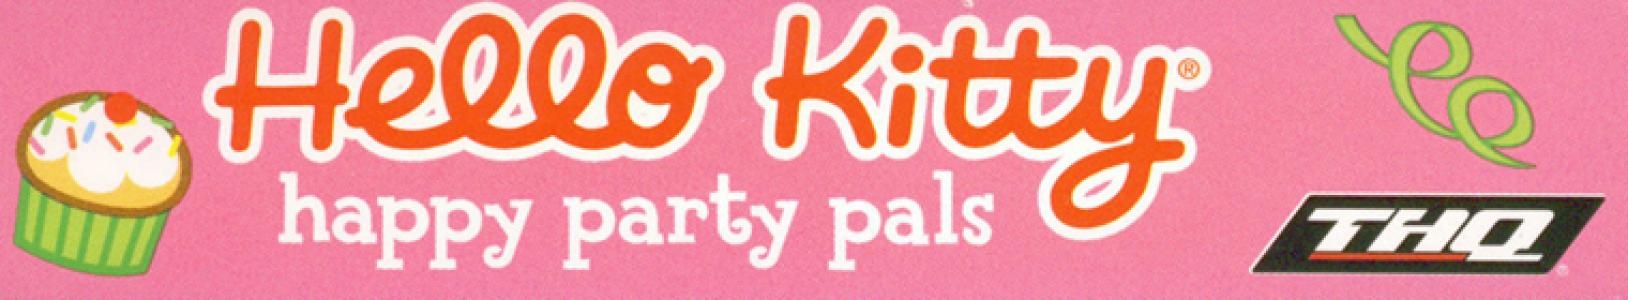 Hello Kitty: Happy Party Pals banner